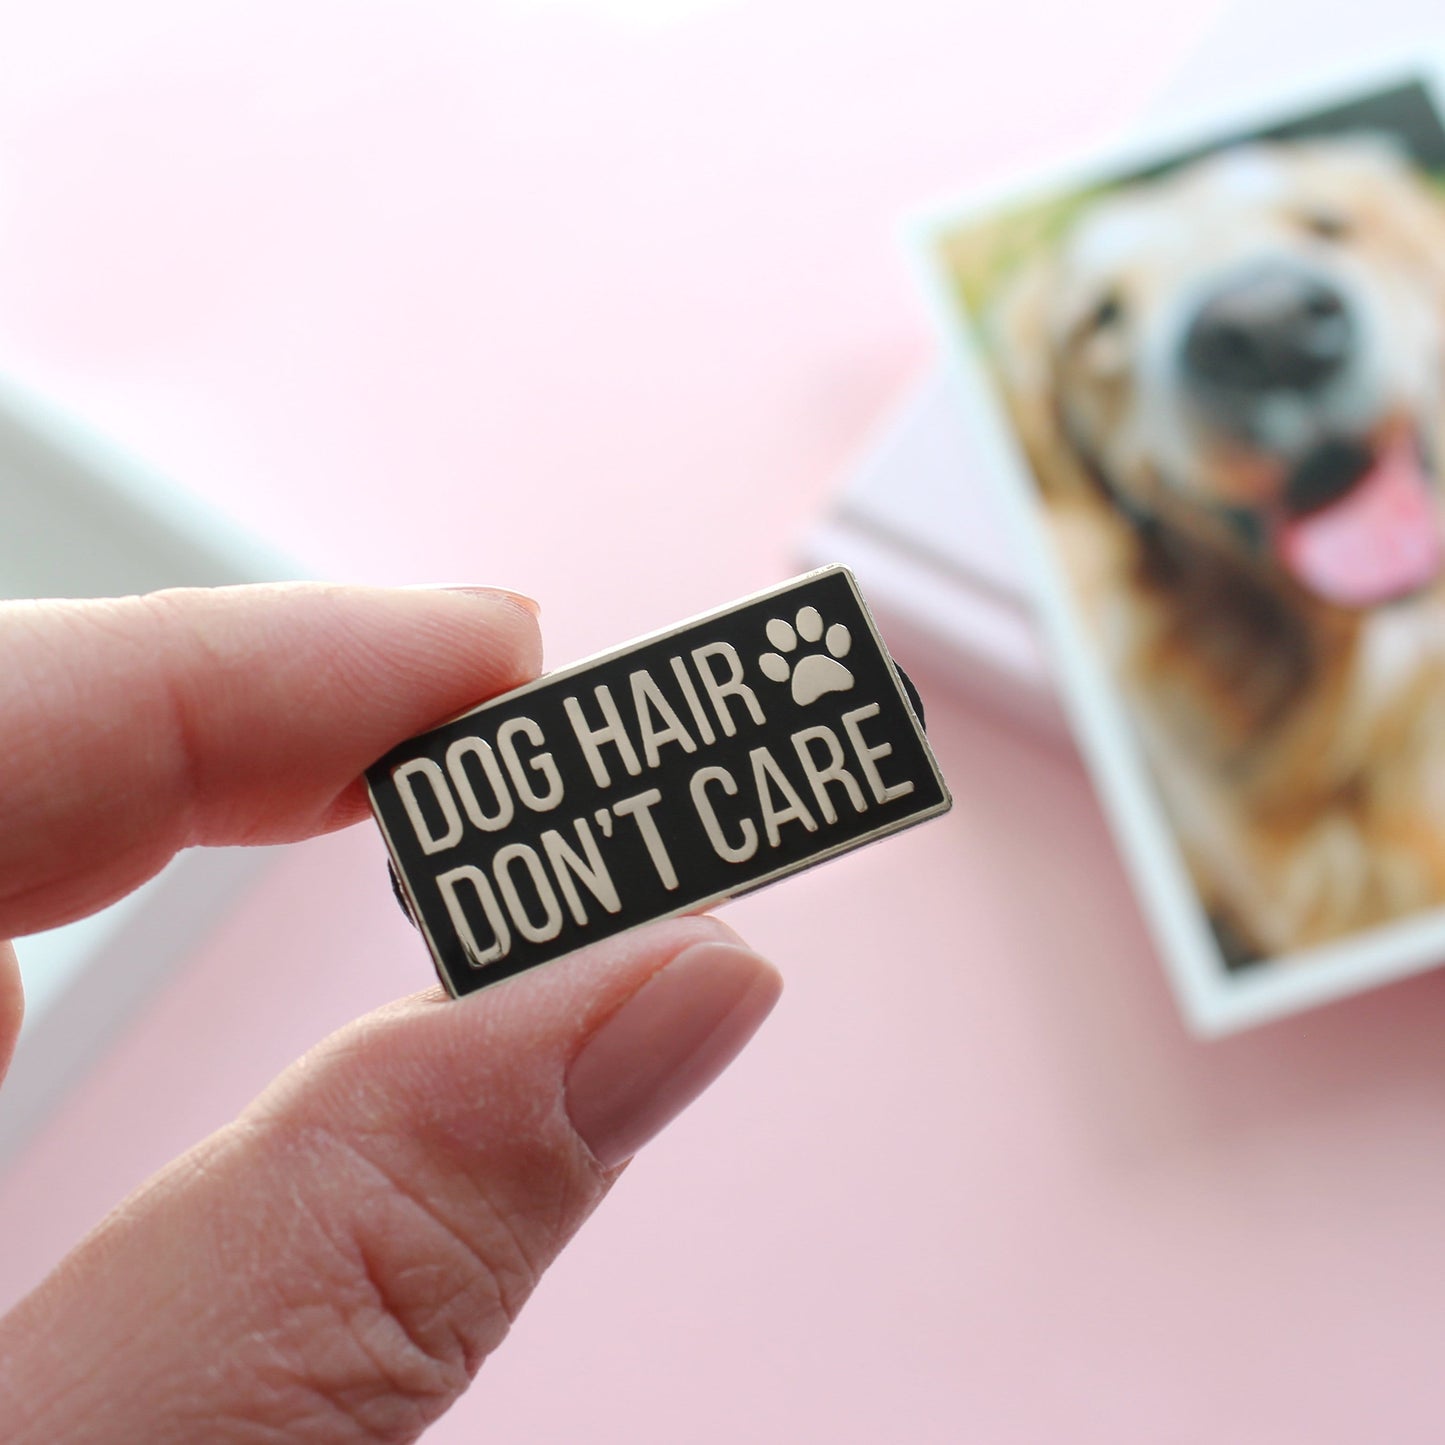 Dog hair don't care pin badge from Purple Tree Designs